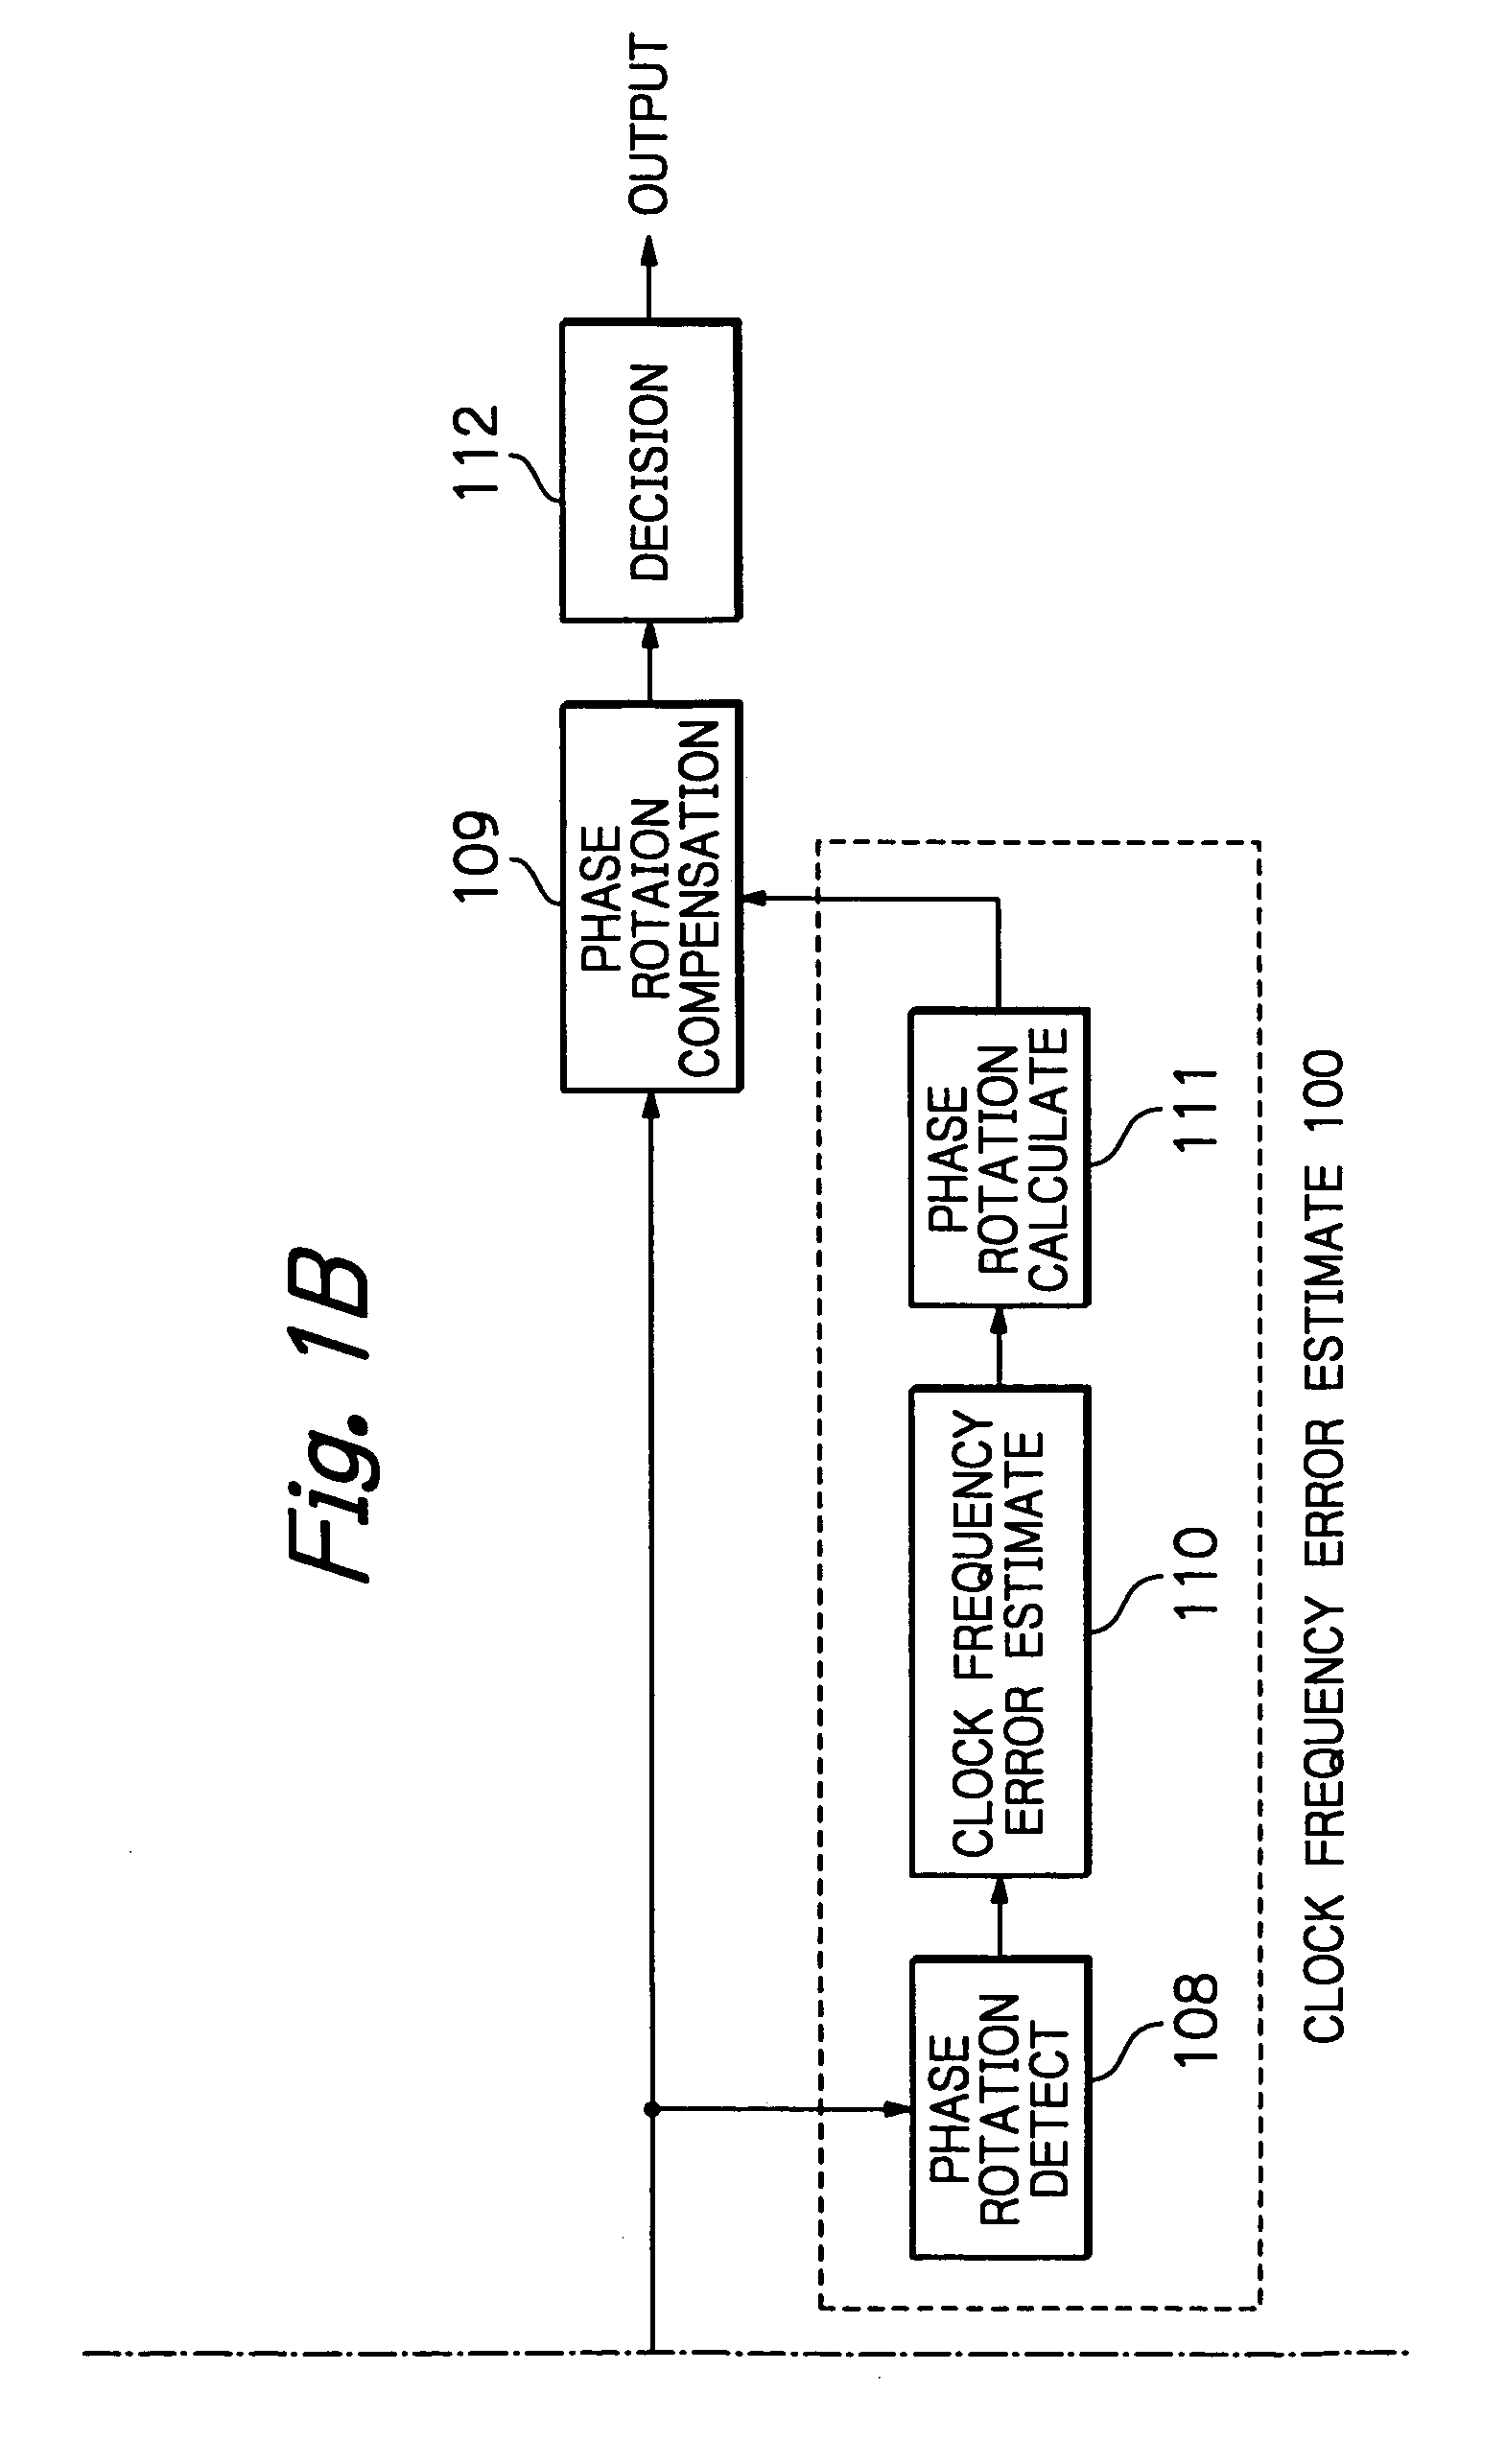 OFDM packet communication receiver